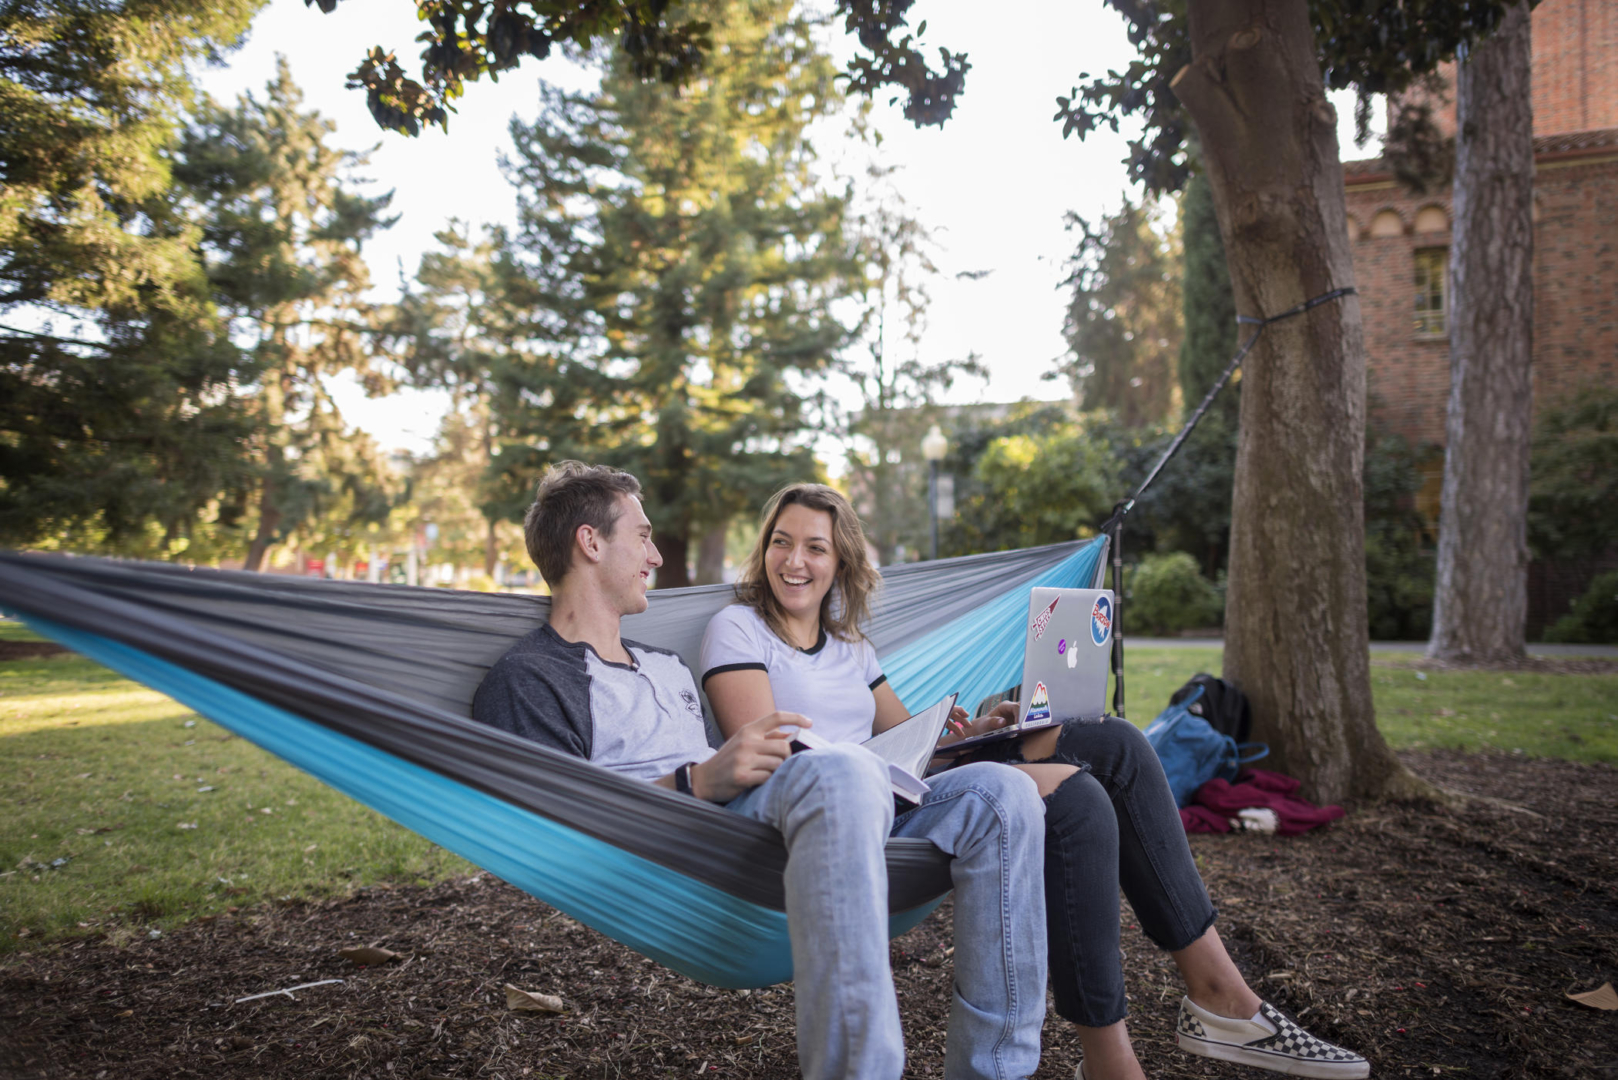 Two students sit on a hammock while studying. One student has a laptop on her lap while the other student holds a textbook.